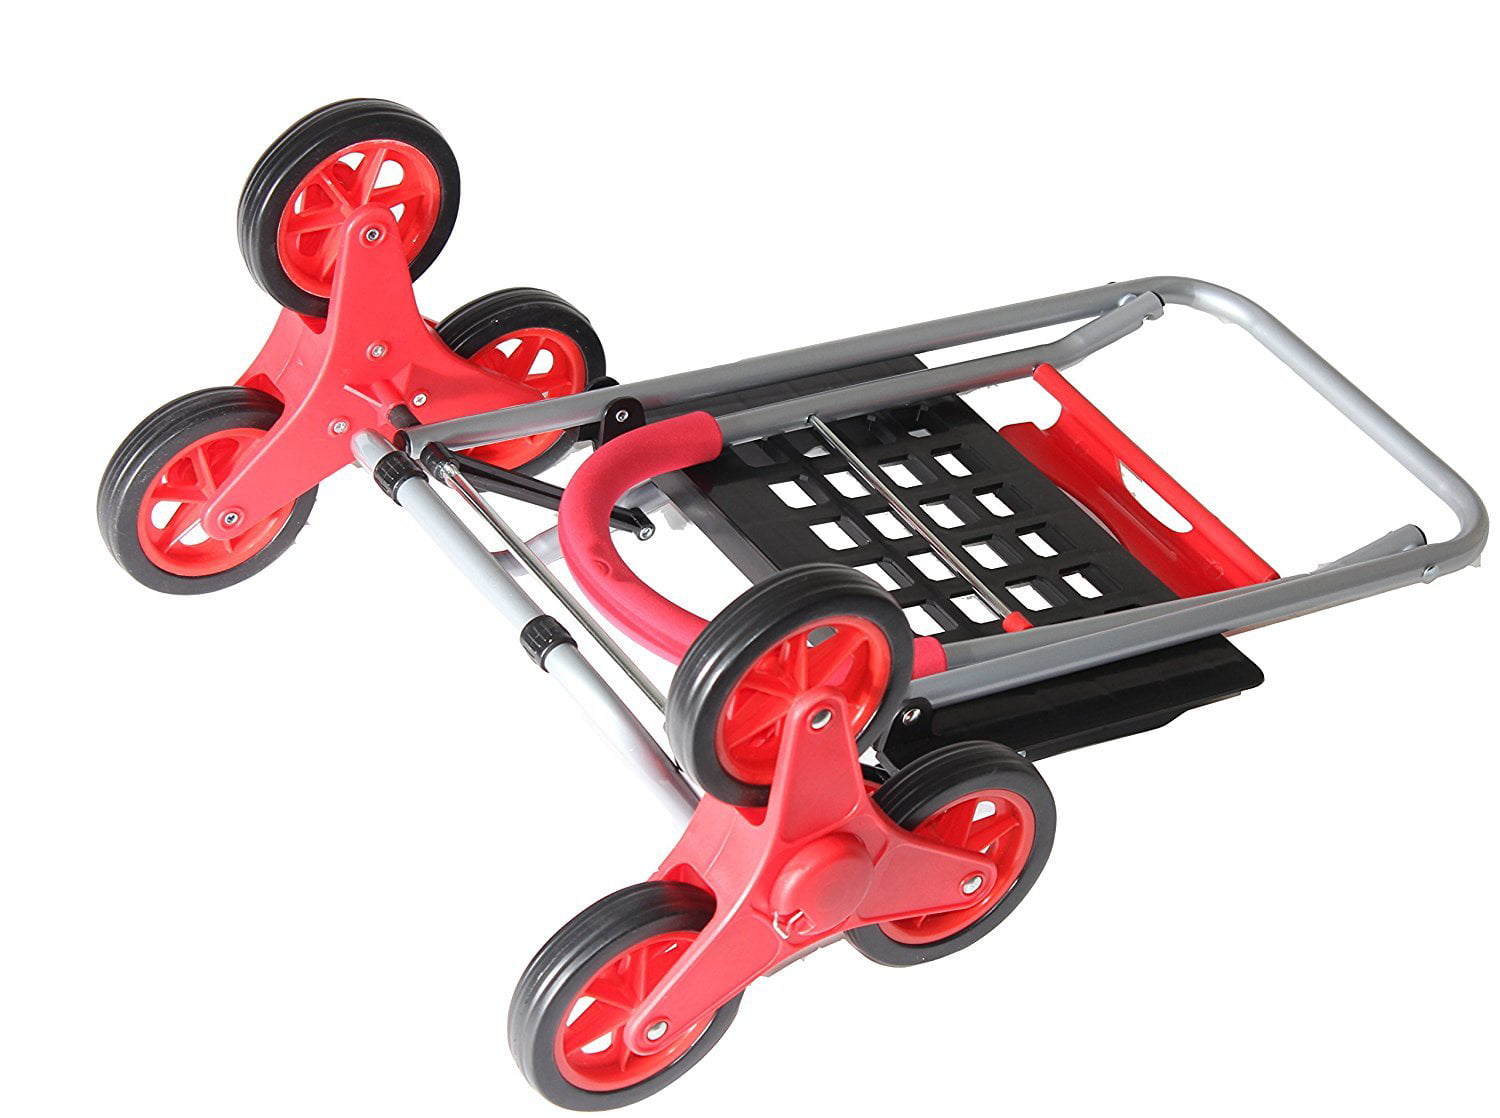 Red Handtruck Hardware Garden Utilty Cart Stair Climber Mighty Max 2 Personal Dolly 